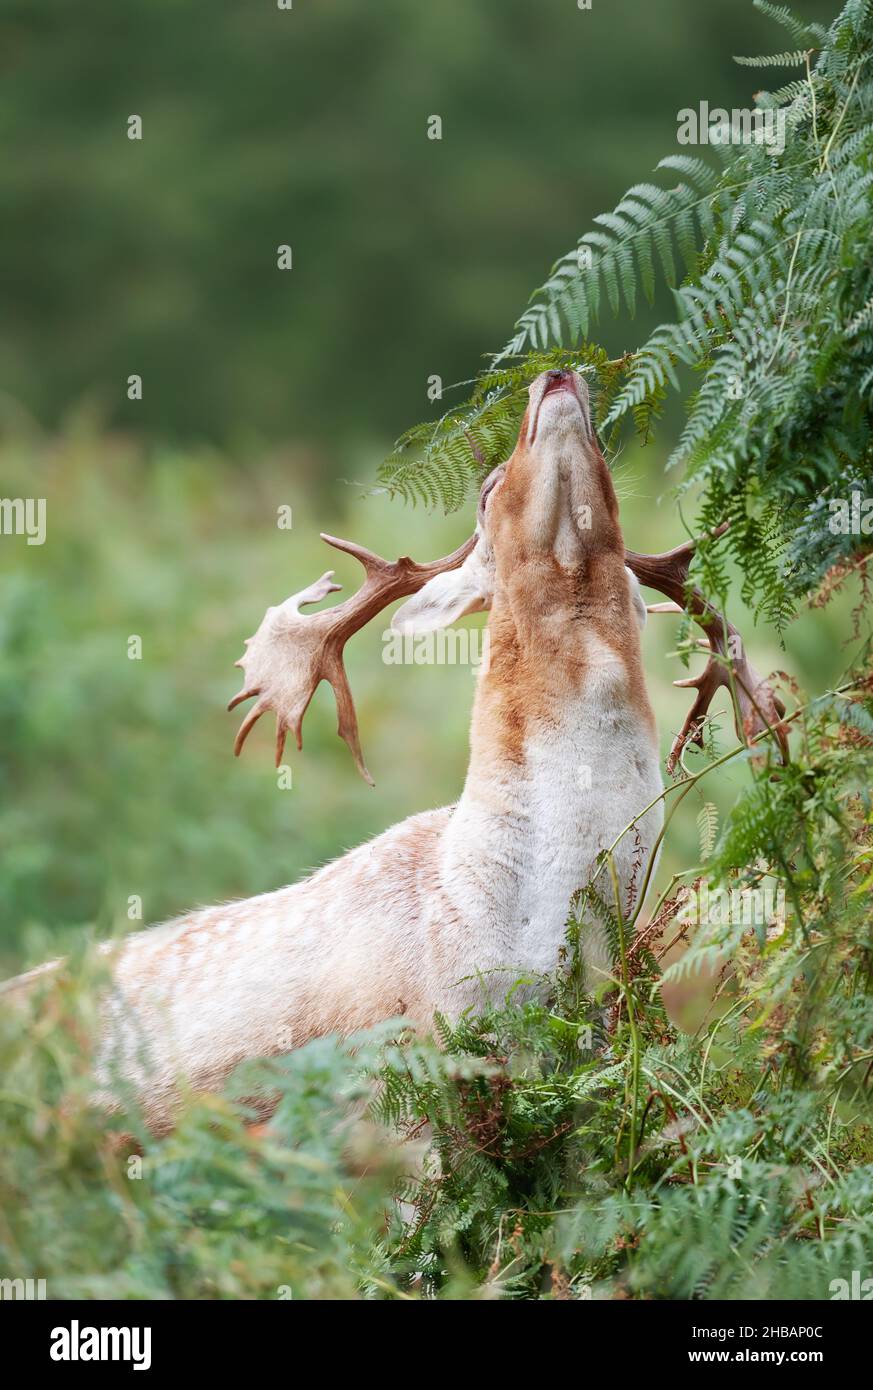 Close-up of a Fallow deer stag smelling bracken in autumn, UK. Stock Photo